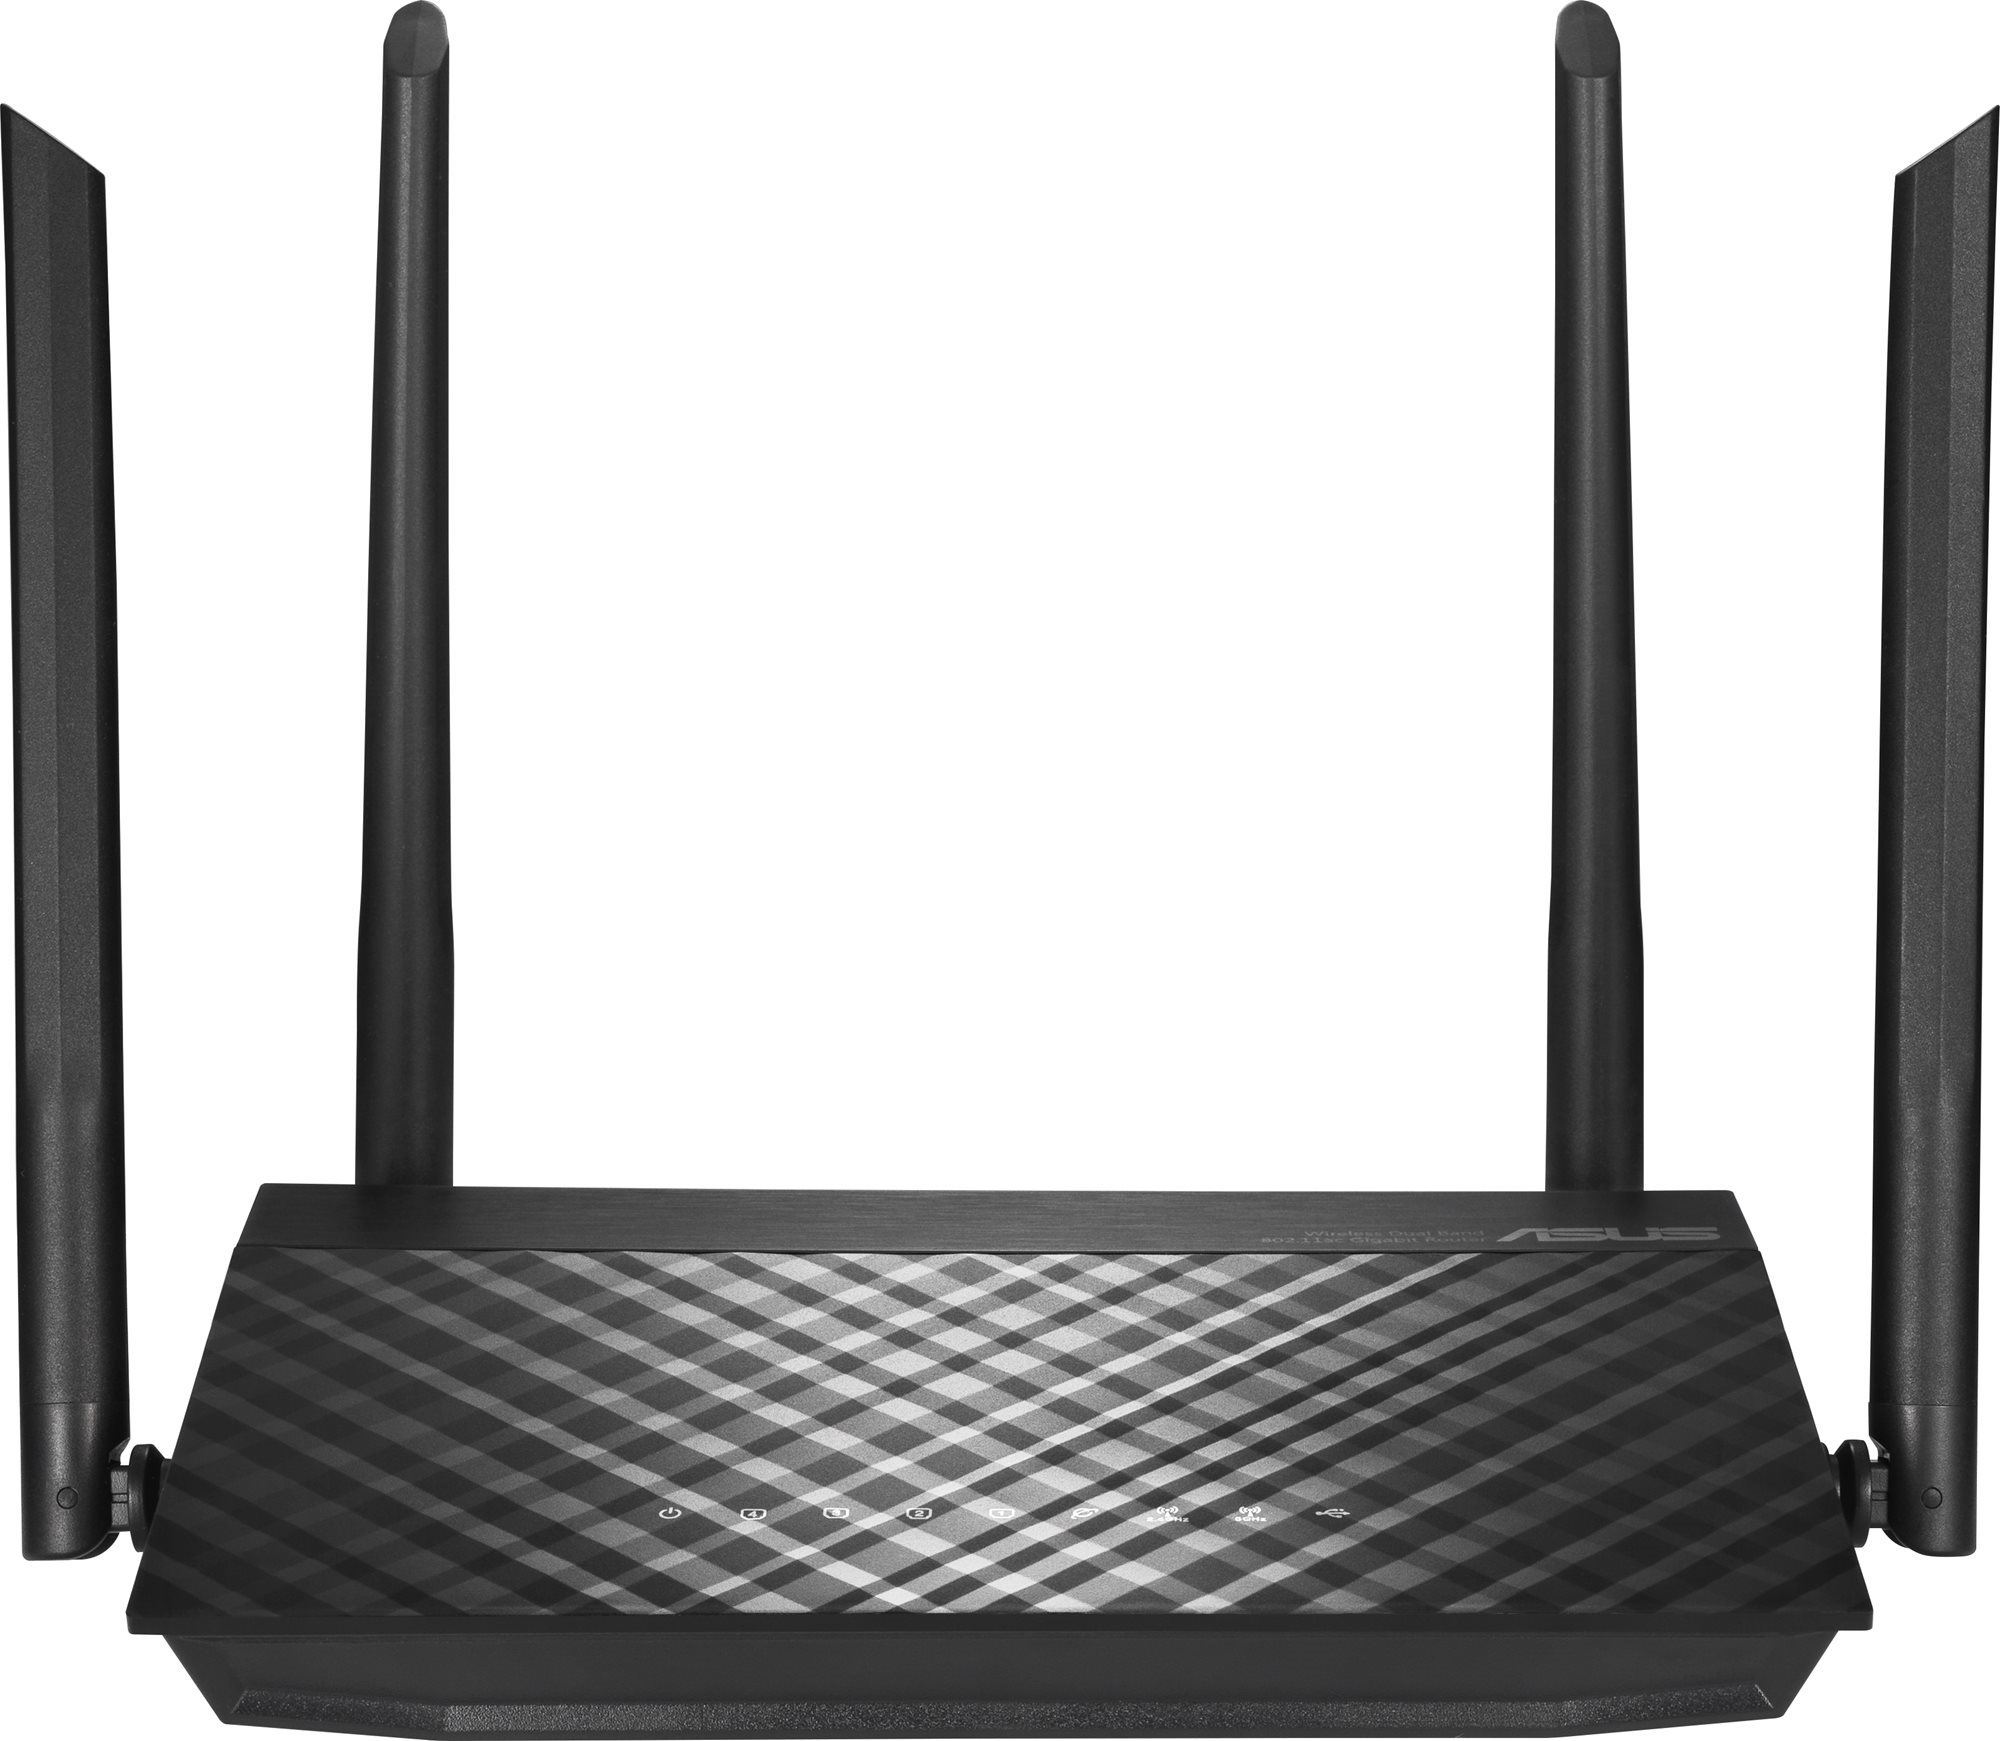 WiFi router Asus RT-AC59U